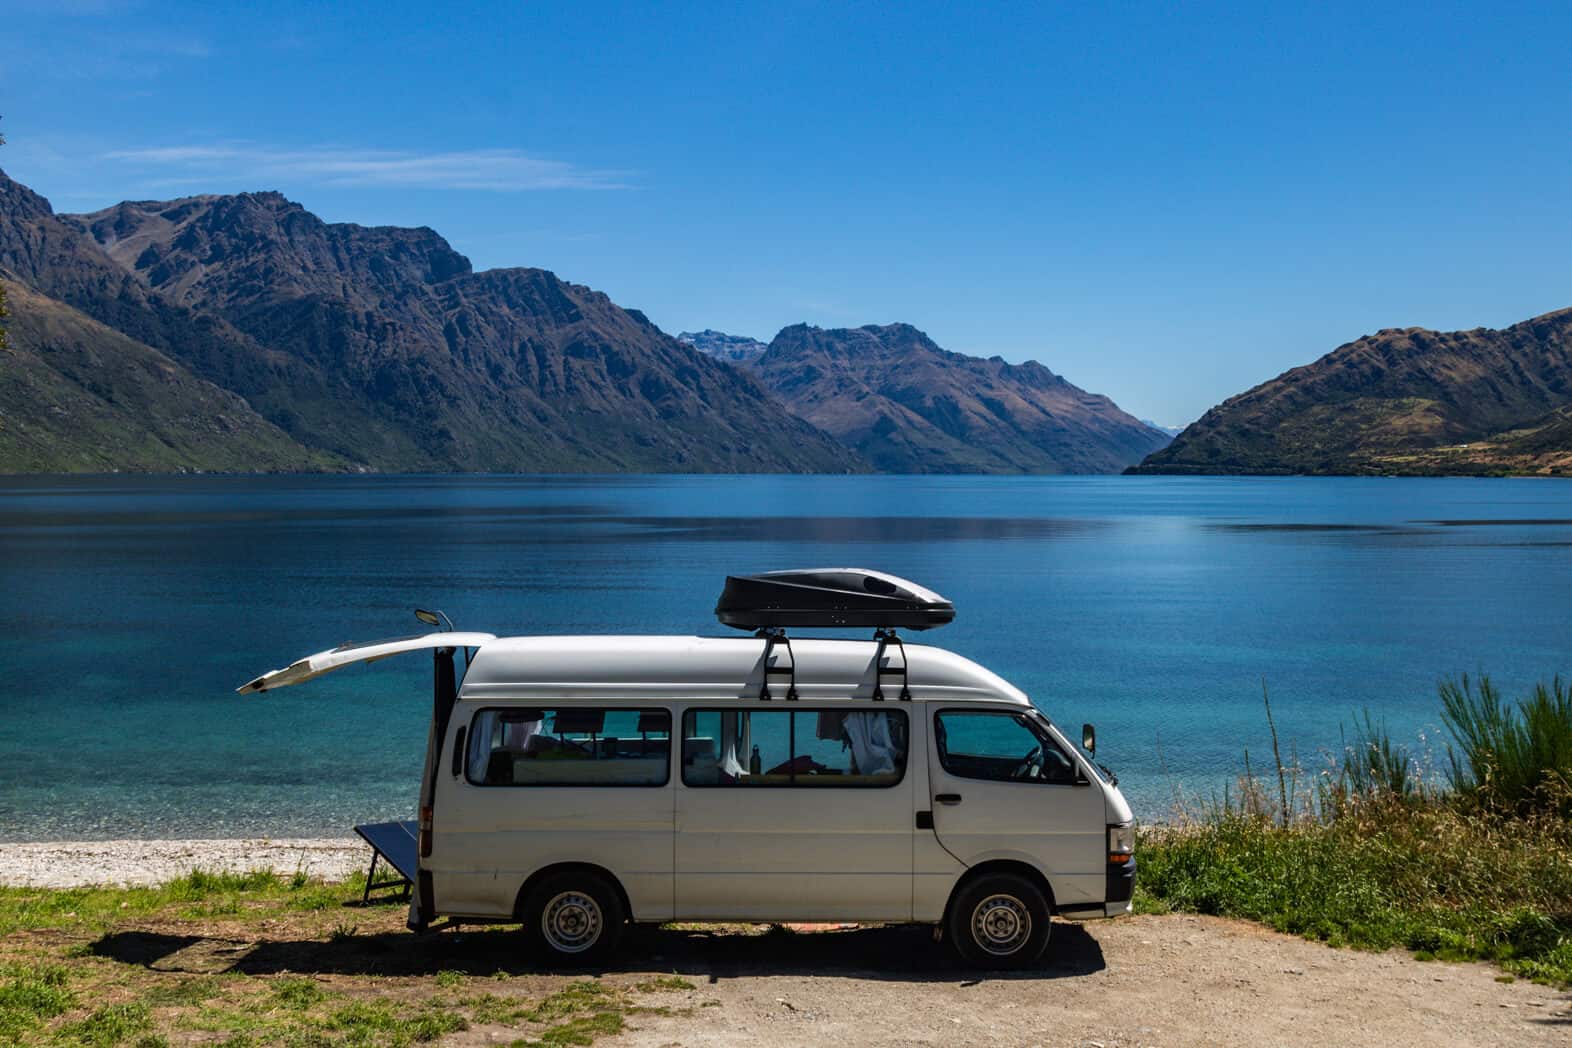 Camping in New Zealand: Favorite Campsites + Tips